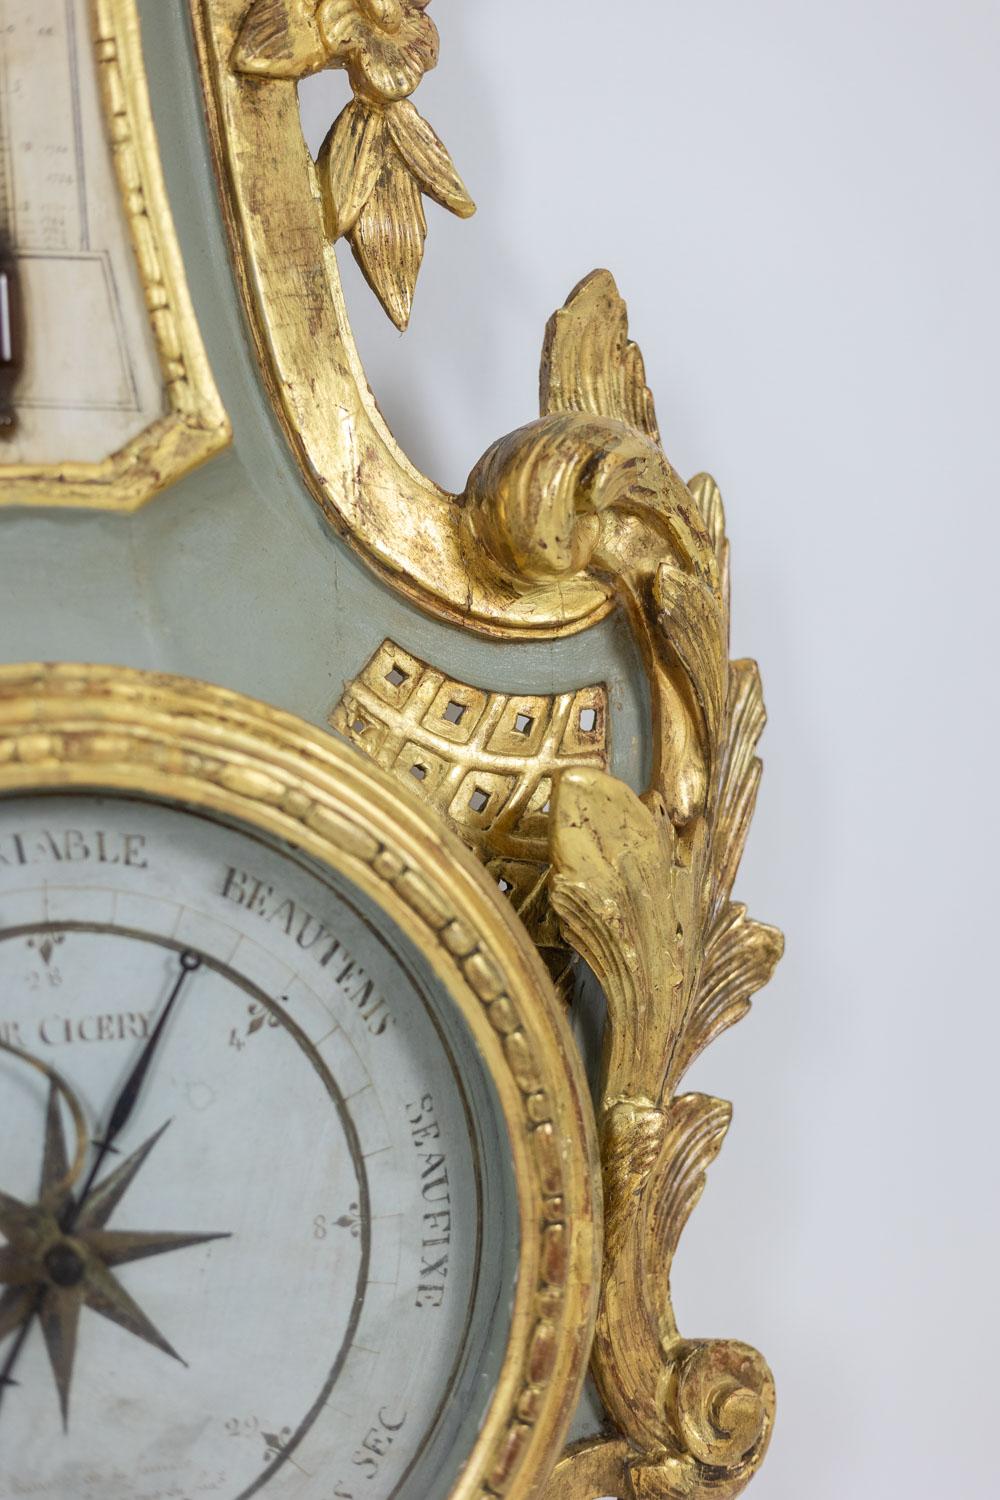 Wood Cicery. Barometer in carved and gilded wood. 18th century period.